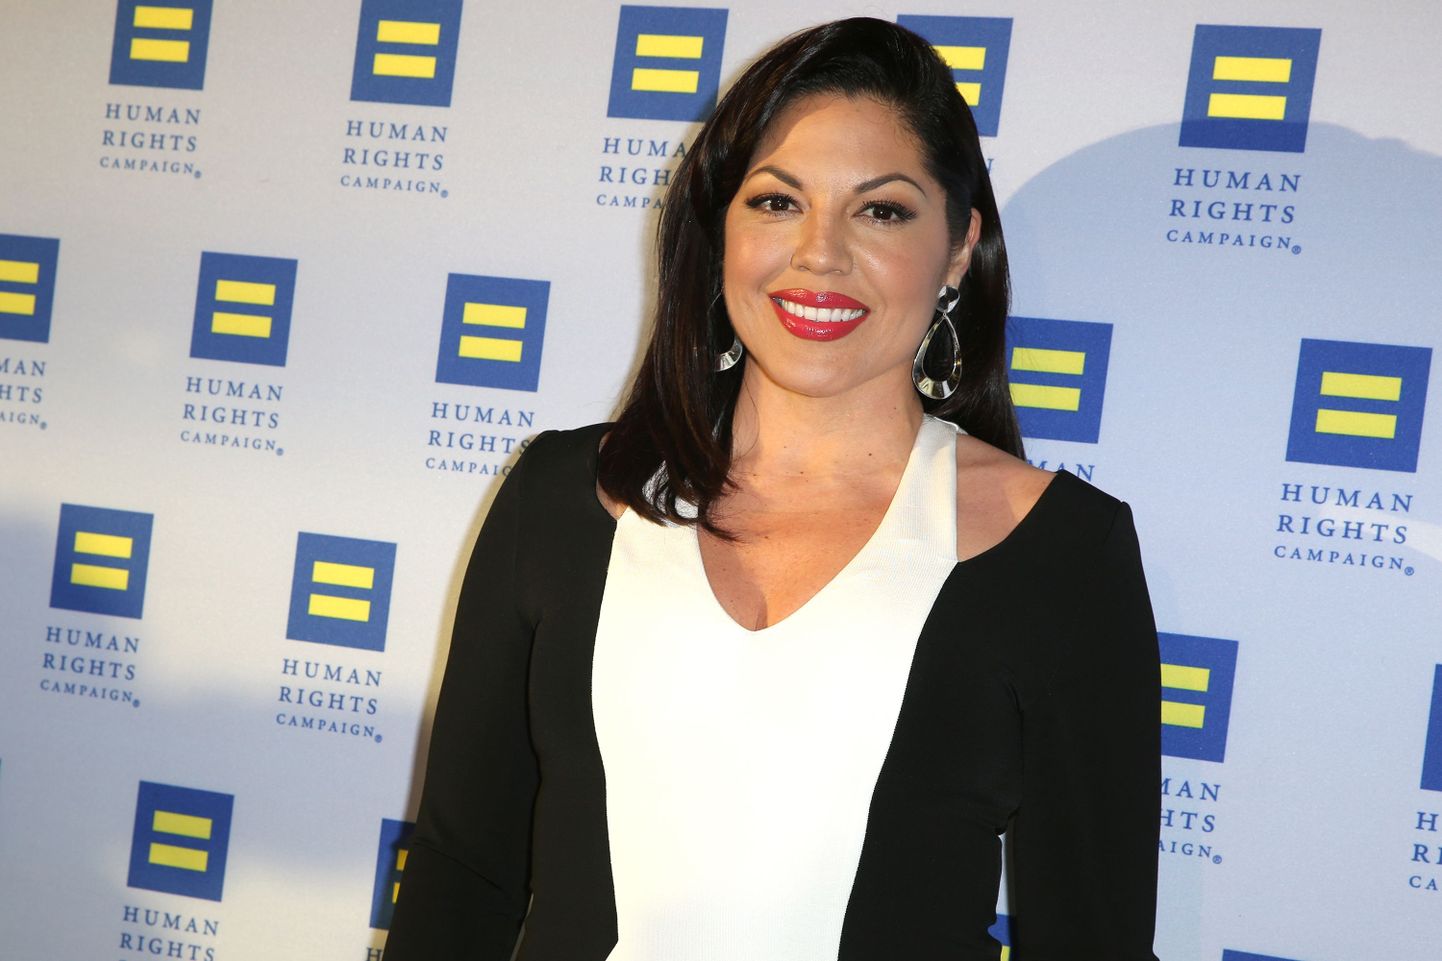 FILE - In this March 14, 2015 file photo, Sara Ramirez arrives at the 2015 Human Rights Campaign Gala Dinner at the JW Marriott LA Live in Los Angeles. Surgeon Callie Torres is turning in her scalpel at Grey Sloan Memorial Hospital. Ramirez, who plays Dr. Torres on "Grey's Anatomy," tweeted Thursday, May 19, 2016, that she's taking "welcome time off" after 10 years with the ABC medical drama. (Photo by Rich Fury/Invision/AP, File)